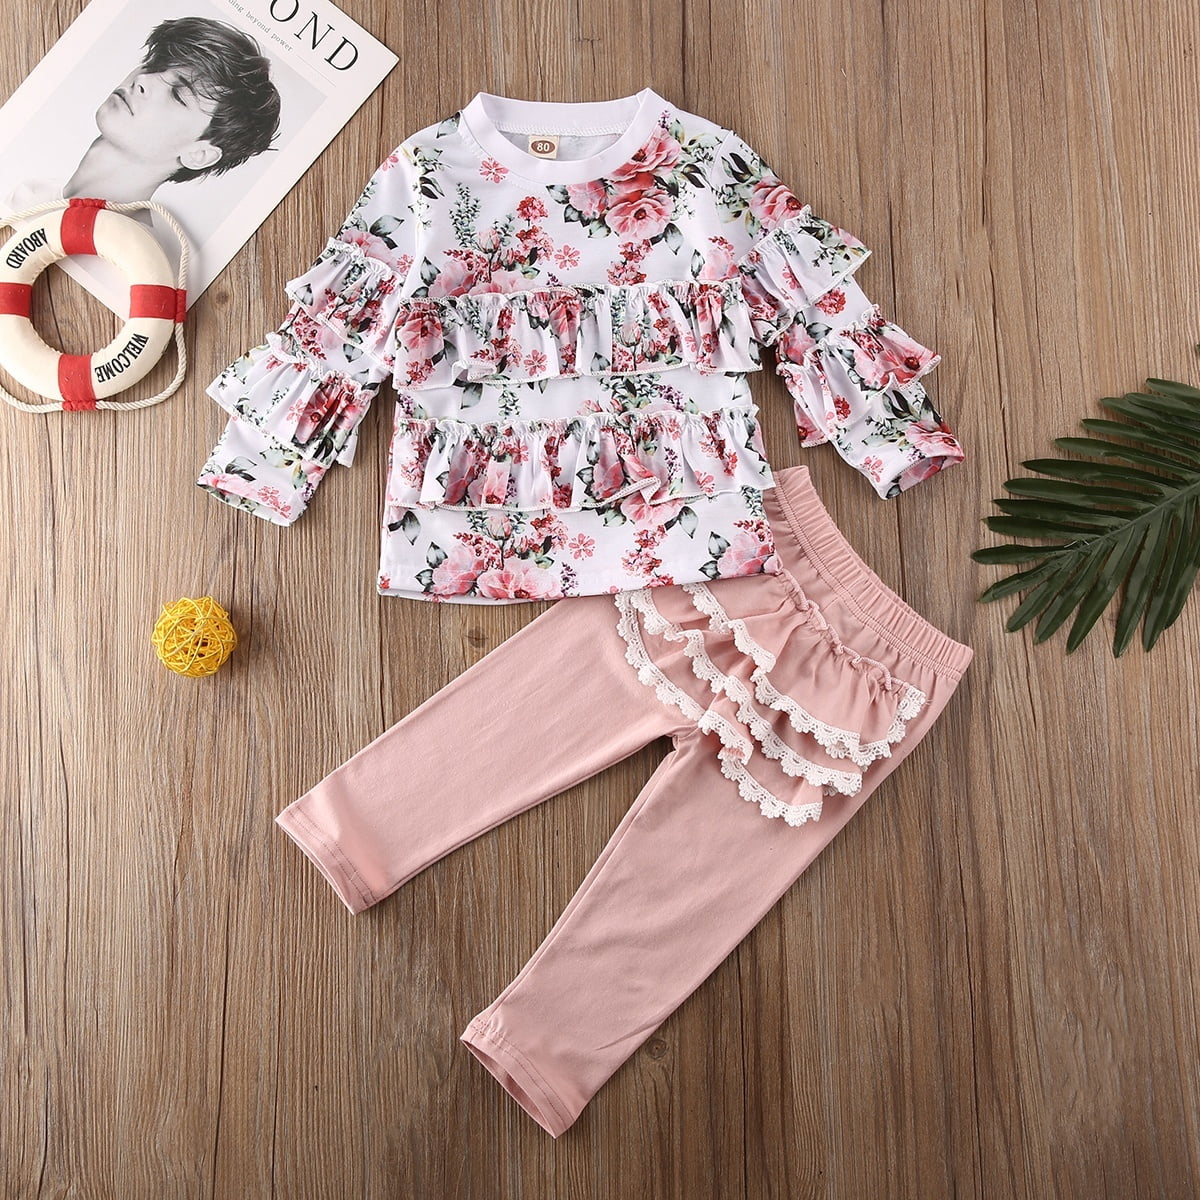 Dookingup Toddler Kids Baby Girl Clothes Ruffle Sleeve T-Shirt Tops+Floral Long Pants Leggings Outfits Set with Handband